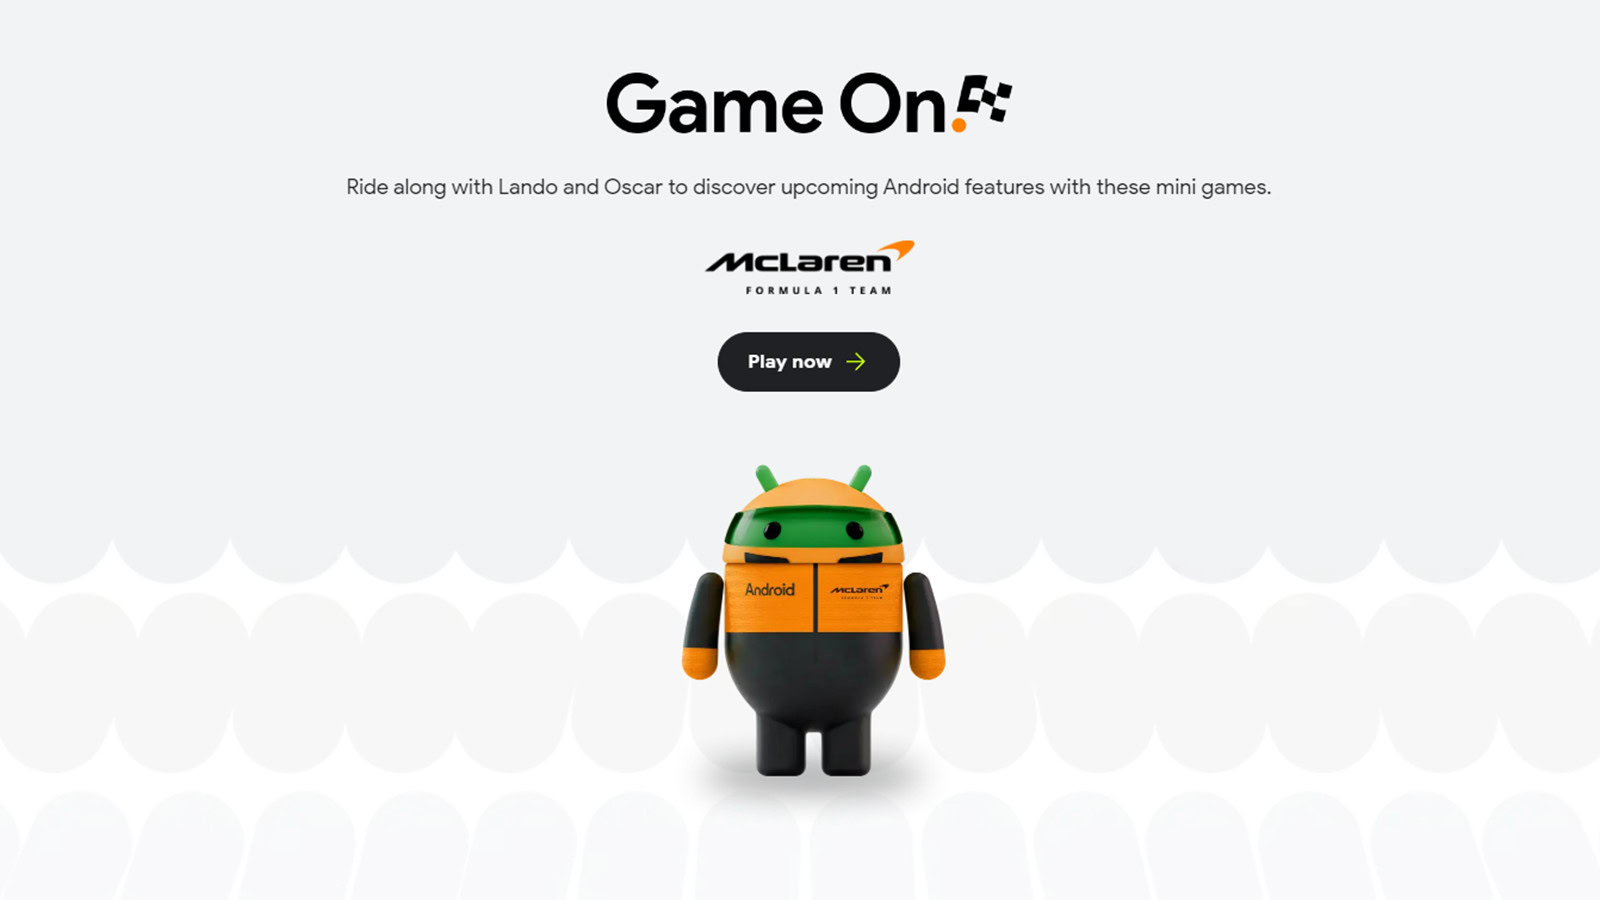 Google and McLaren team up to showcase Android 15 features through mini-games